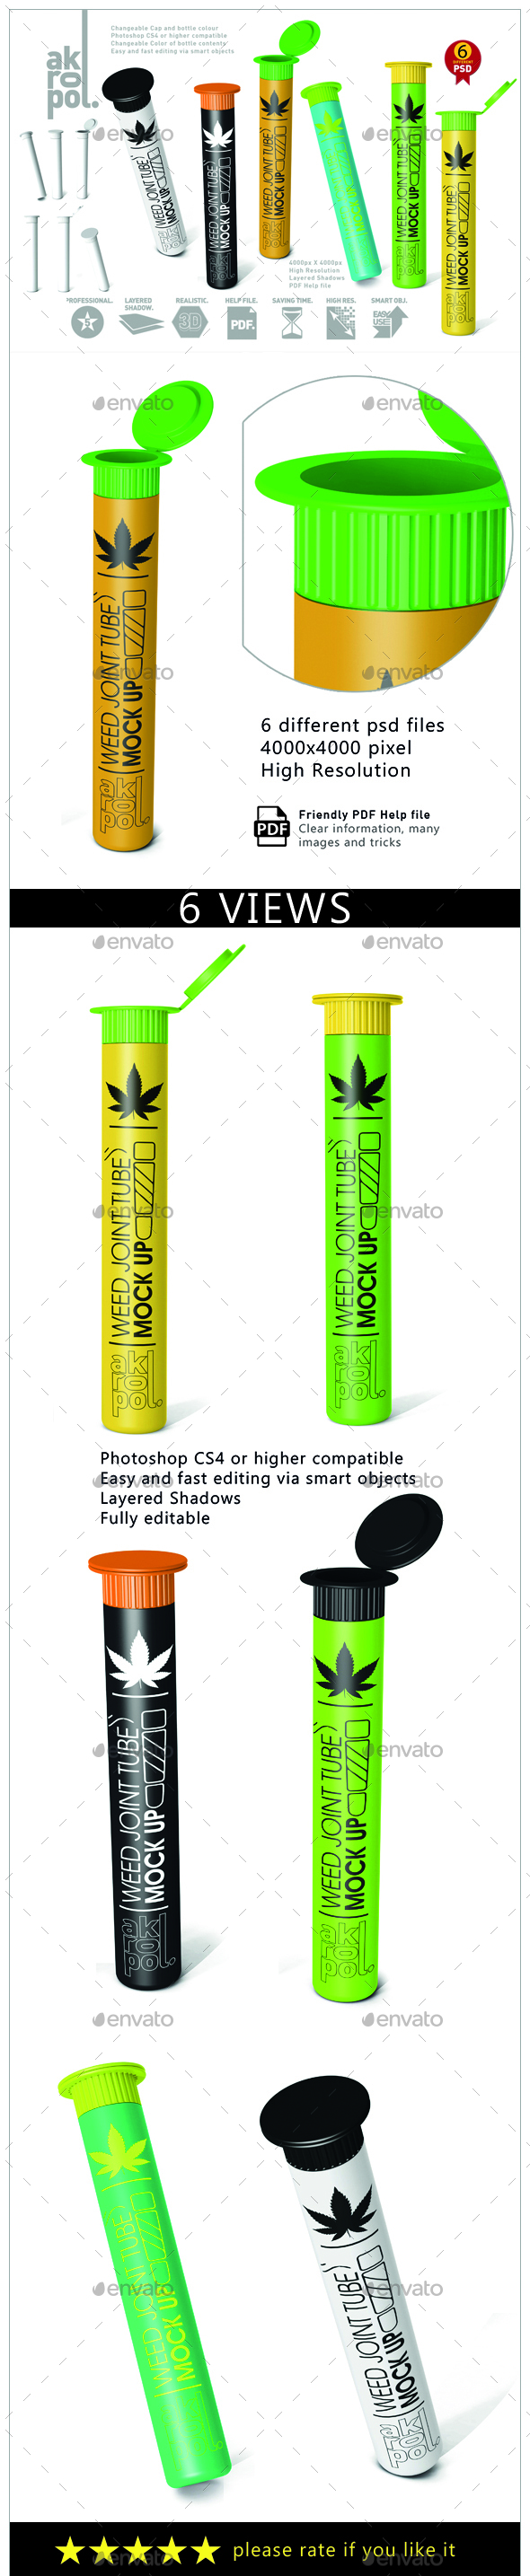 Weed Joint Pre Roll Plastic Tube on Yellow Images Creative Store